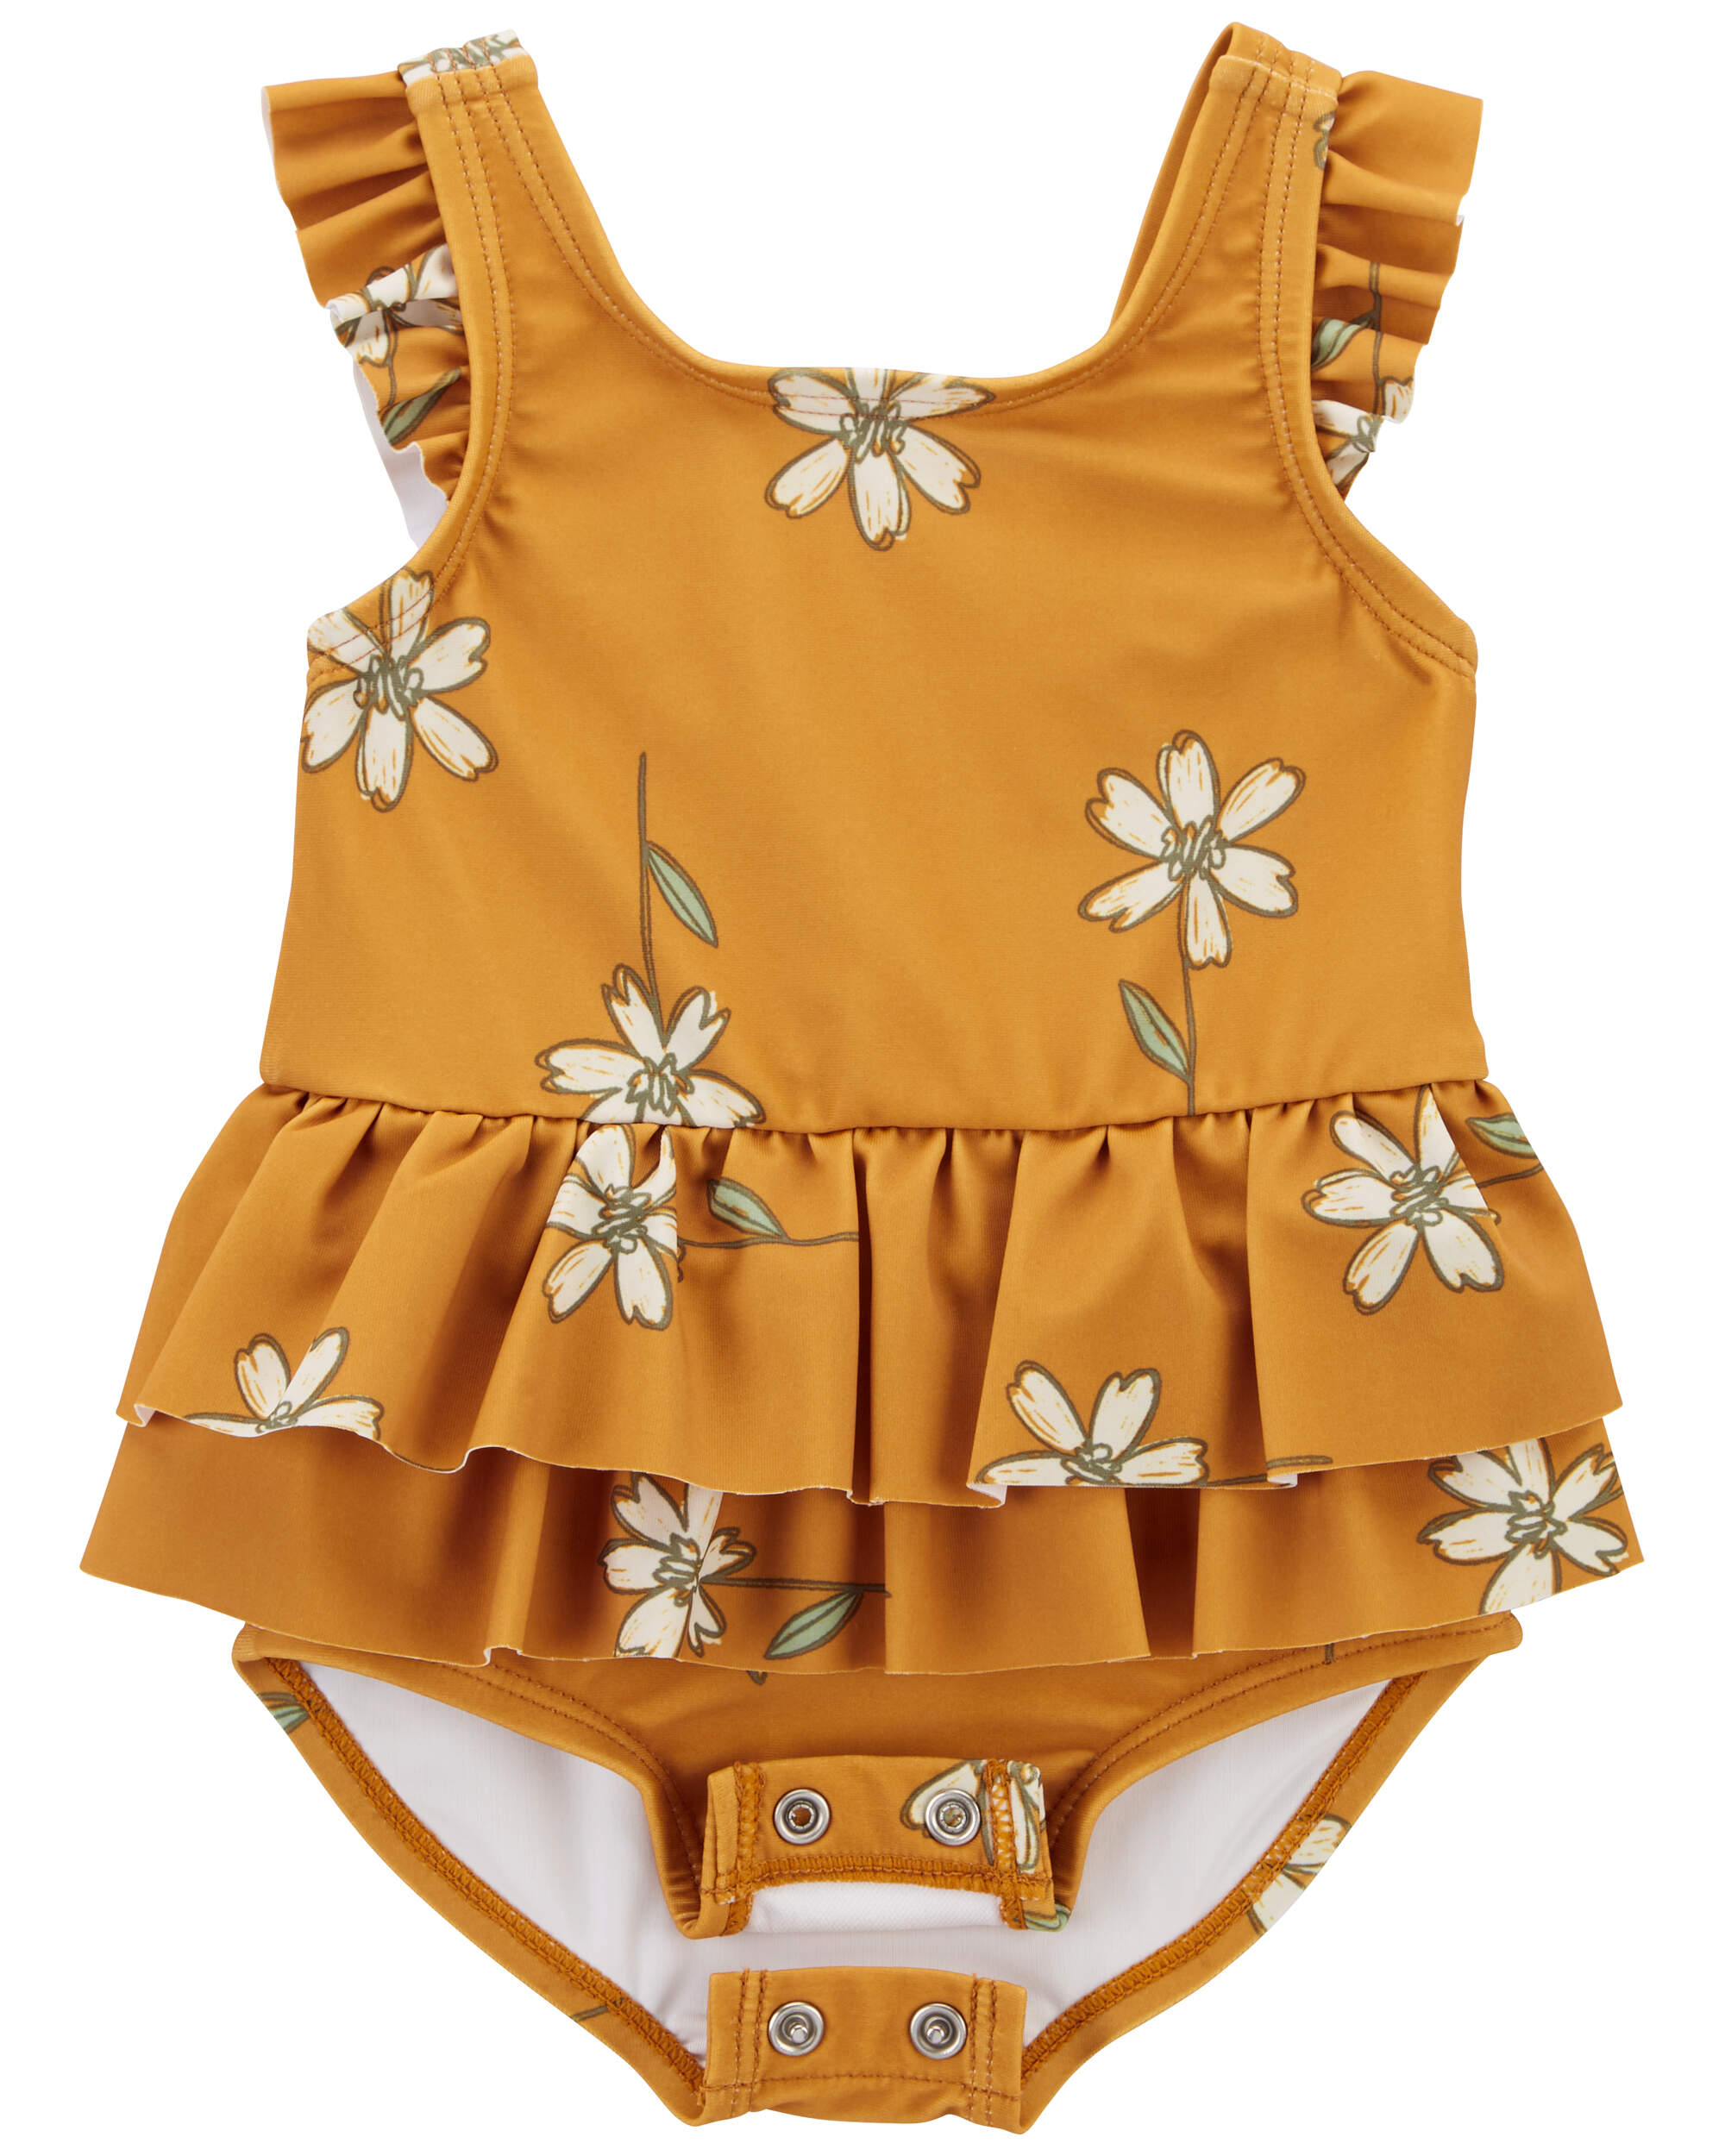 Baby Floral 1-Piece Swimsuit